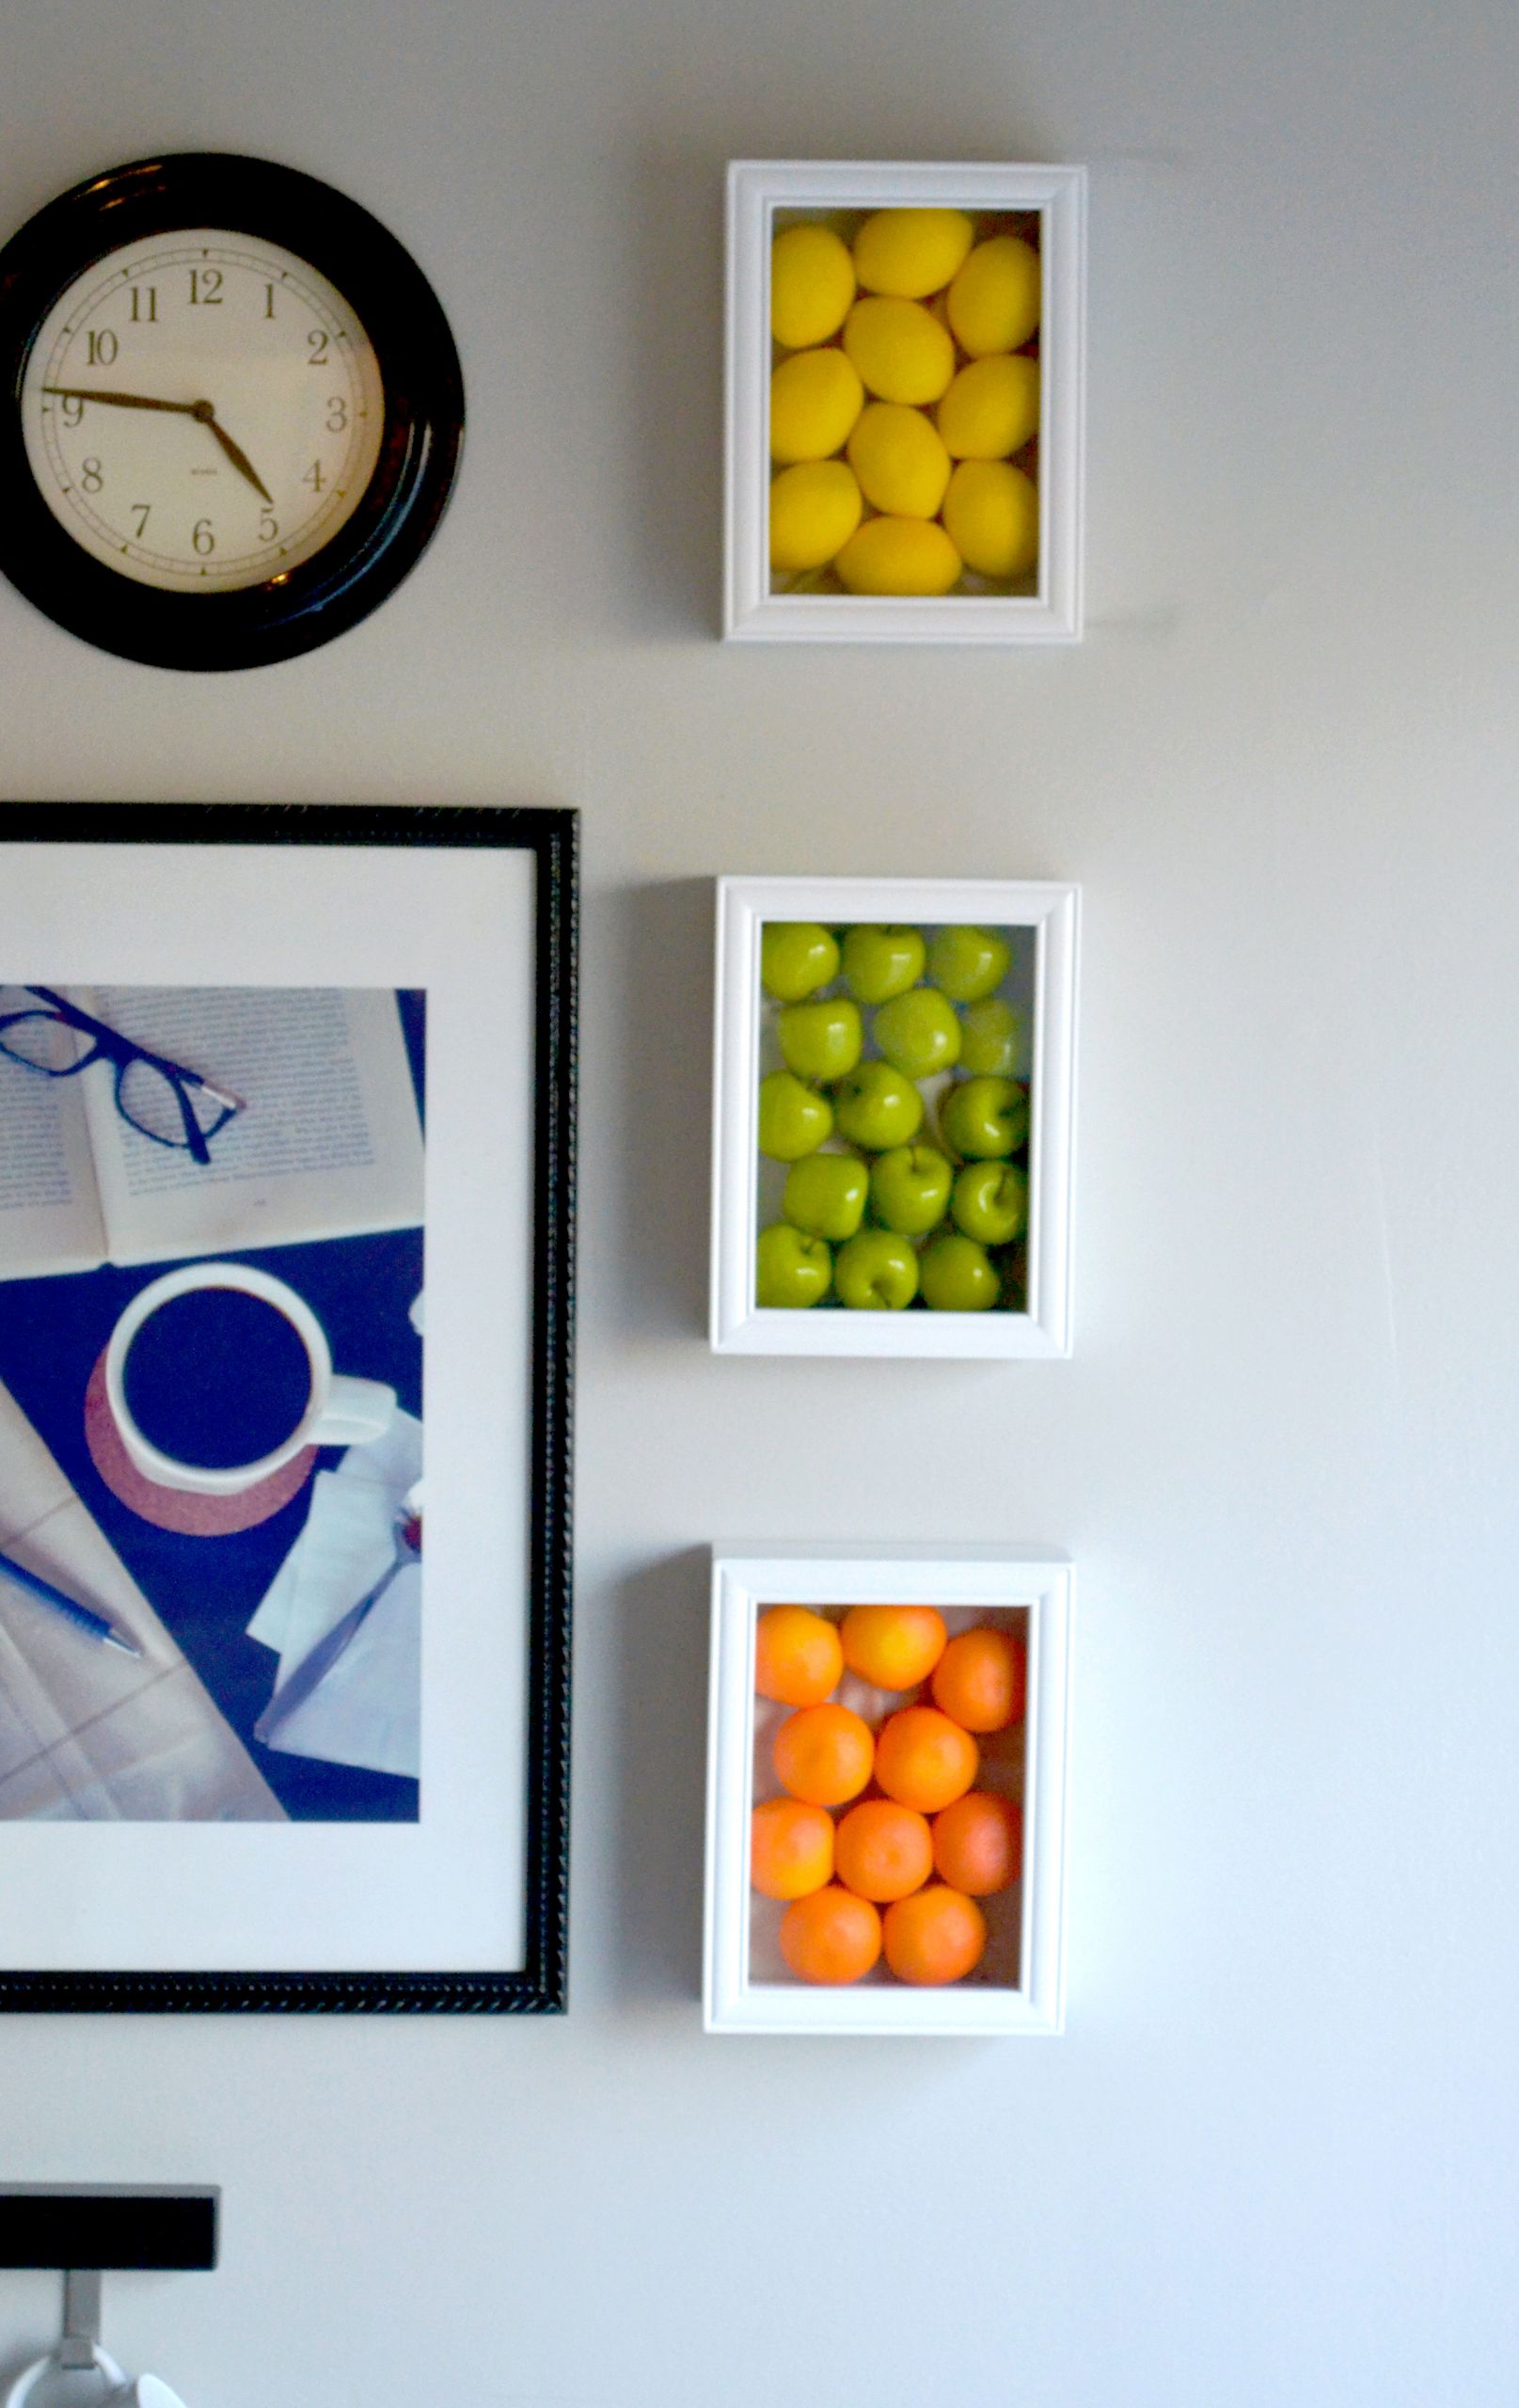 Pictures For The Kitchen Walls
 Colorful Kitchen Wall Art With Fake Fruits